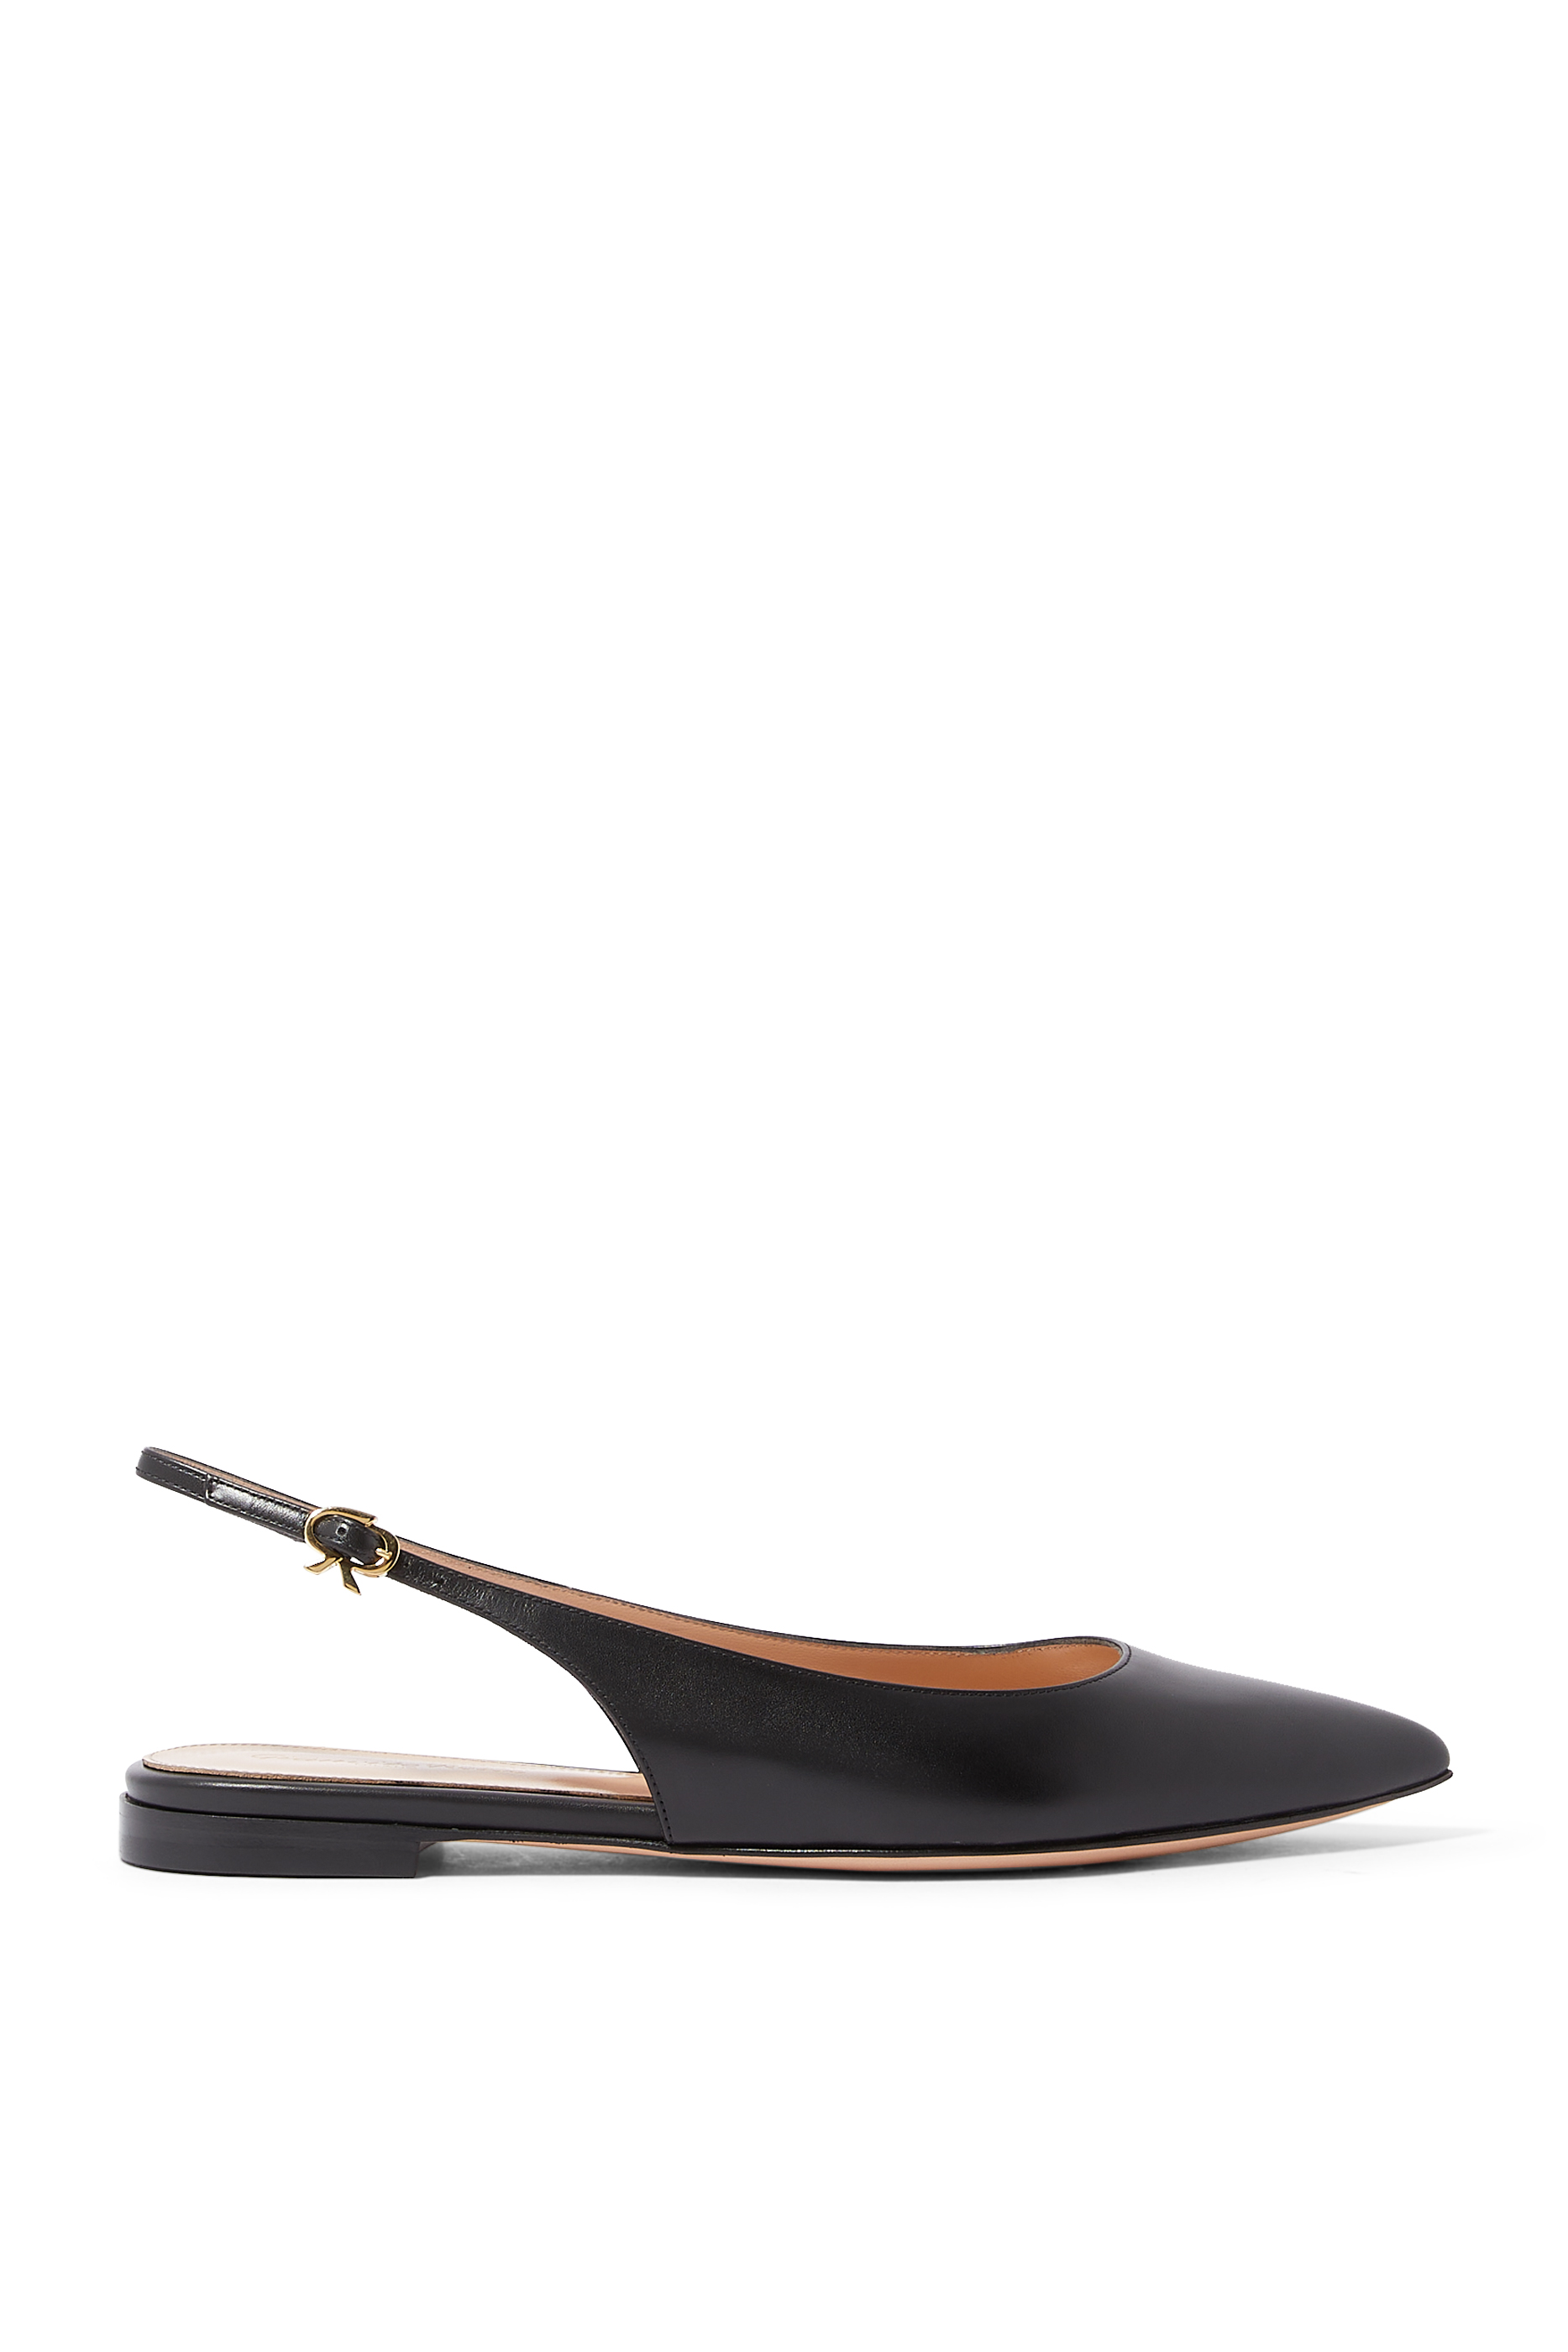 Buy Gianvito Rossi Katty Leather Slingback Flats for Womens ...